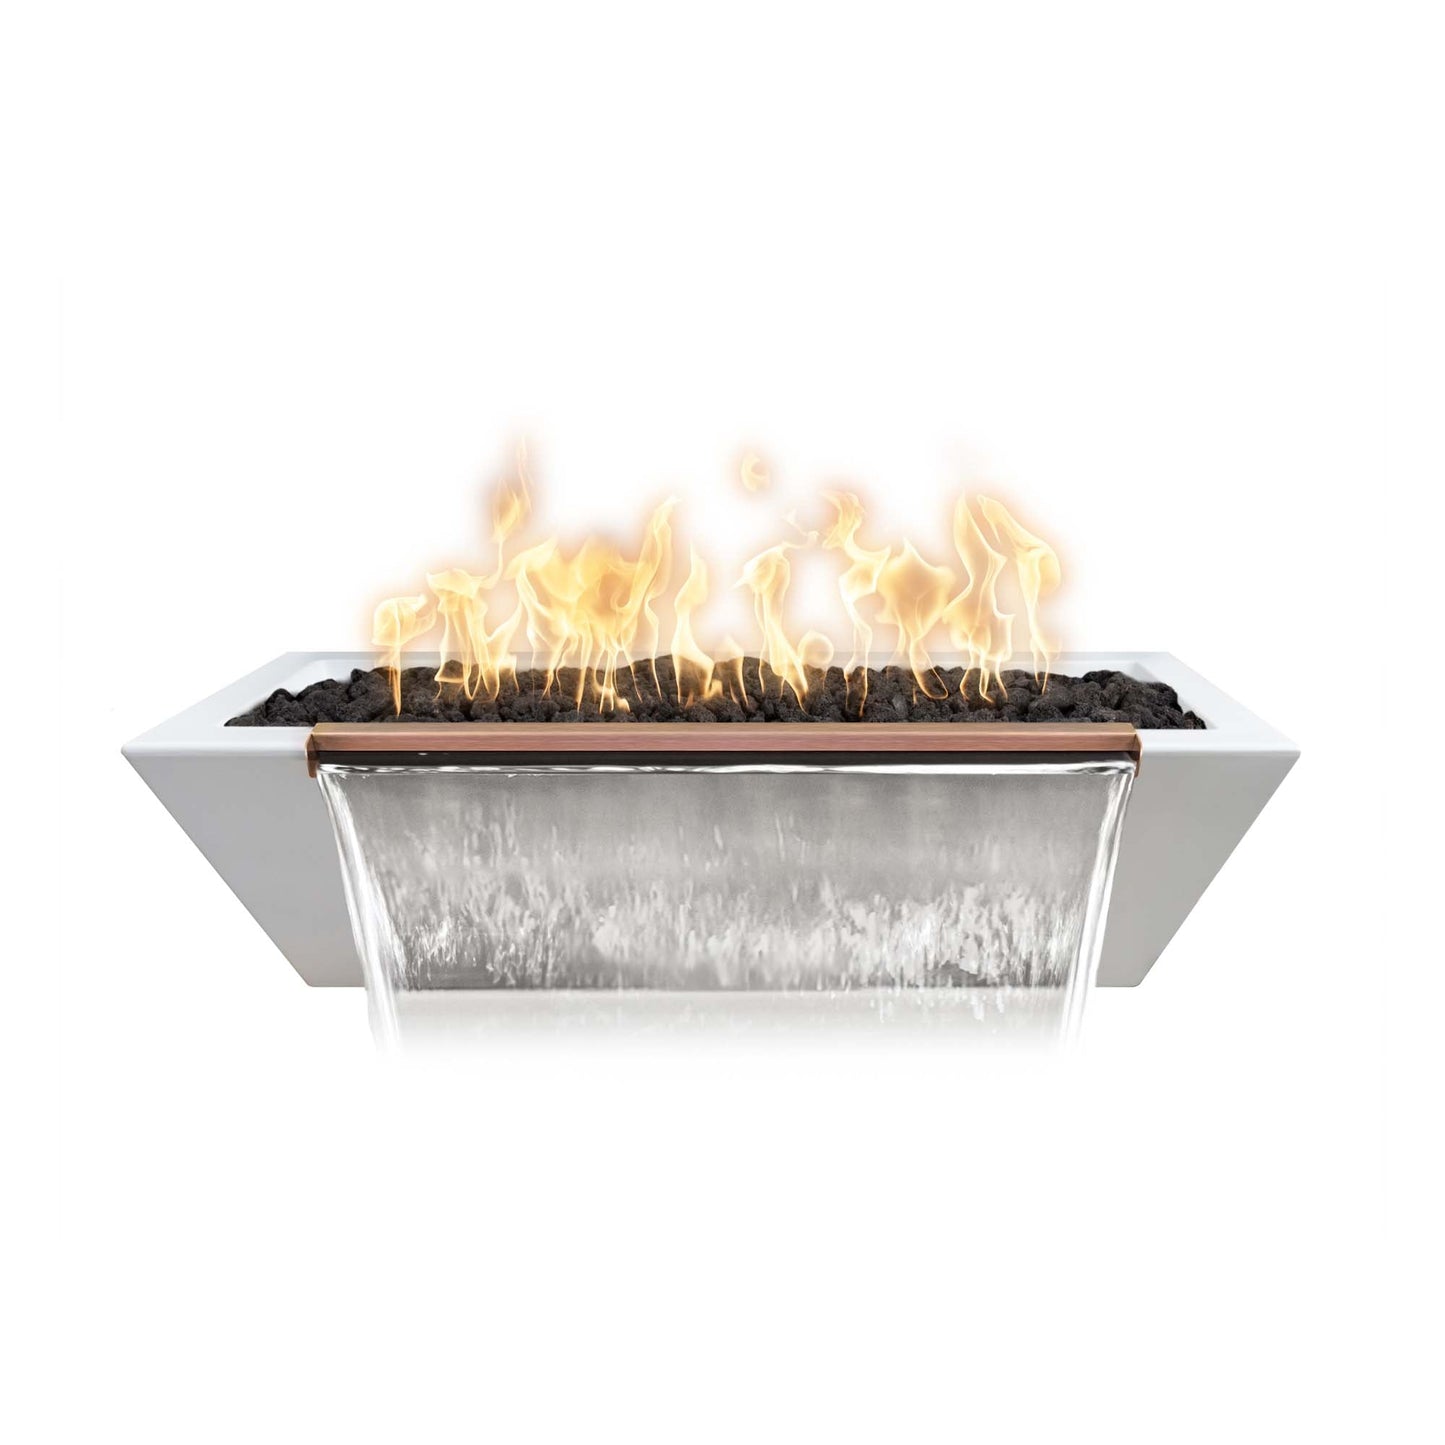 The Outdoor Plus Linear Maya 60" Chocolate GFRC Concrete Natural Gas Fire & Water Bowl with Match Lit with Flame Sense Ignition